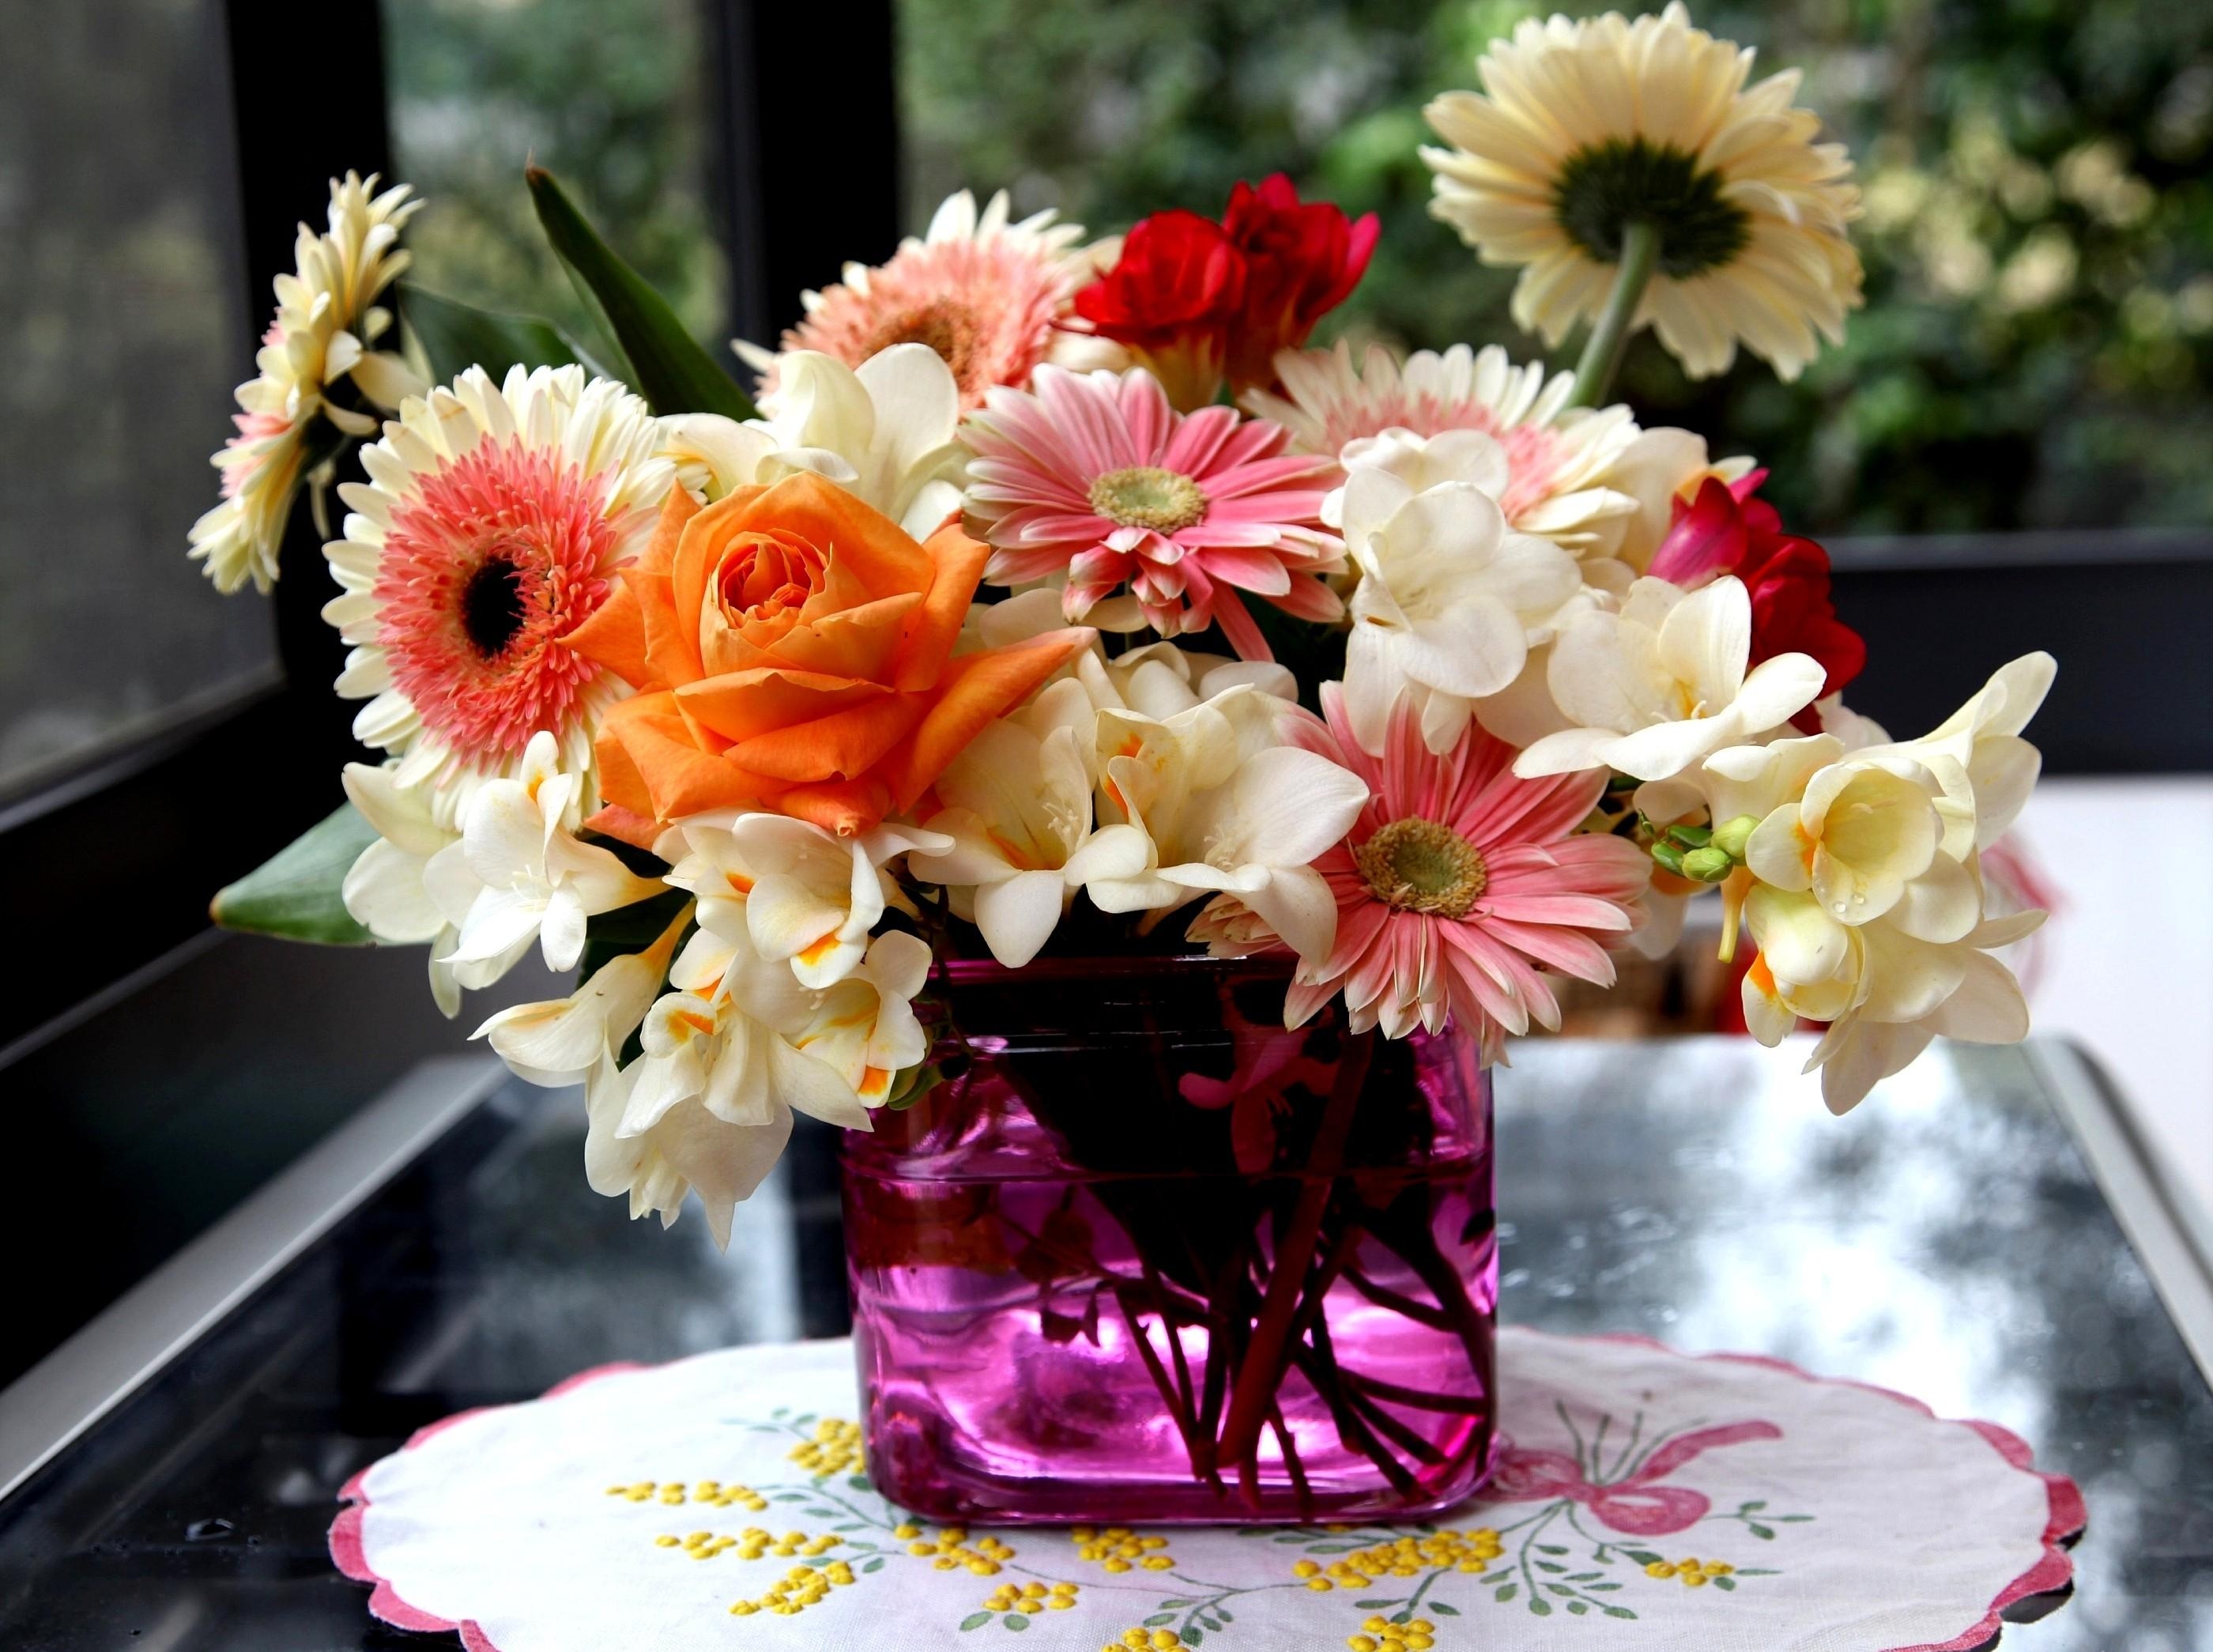 gerberas, roses, freesia, vase Bouquet HQ Background Images